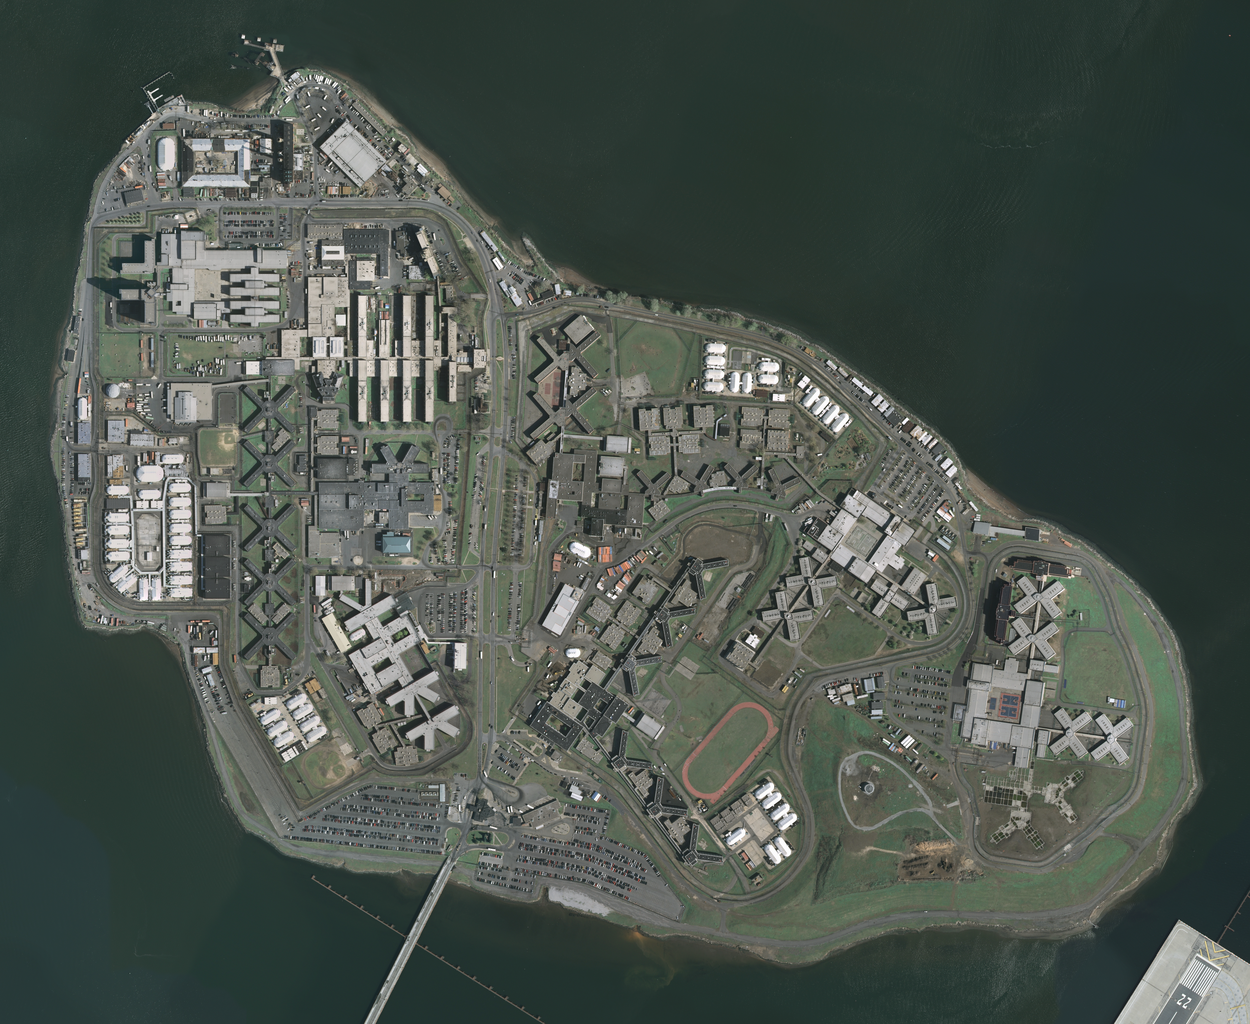 An aerial view of Rikers Island in New York City